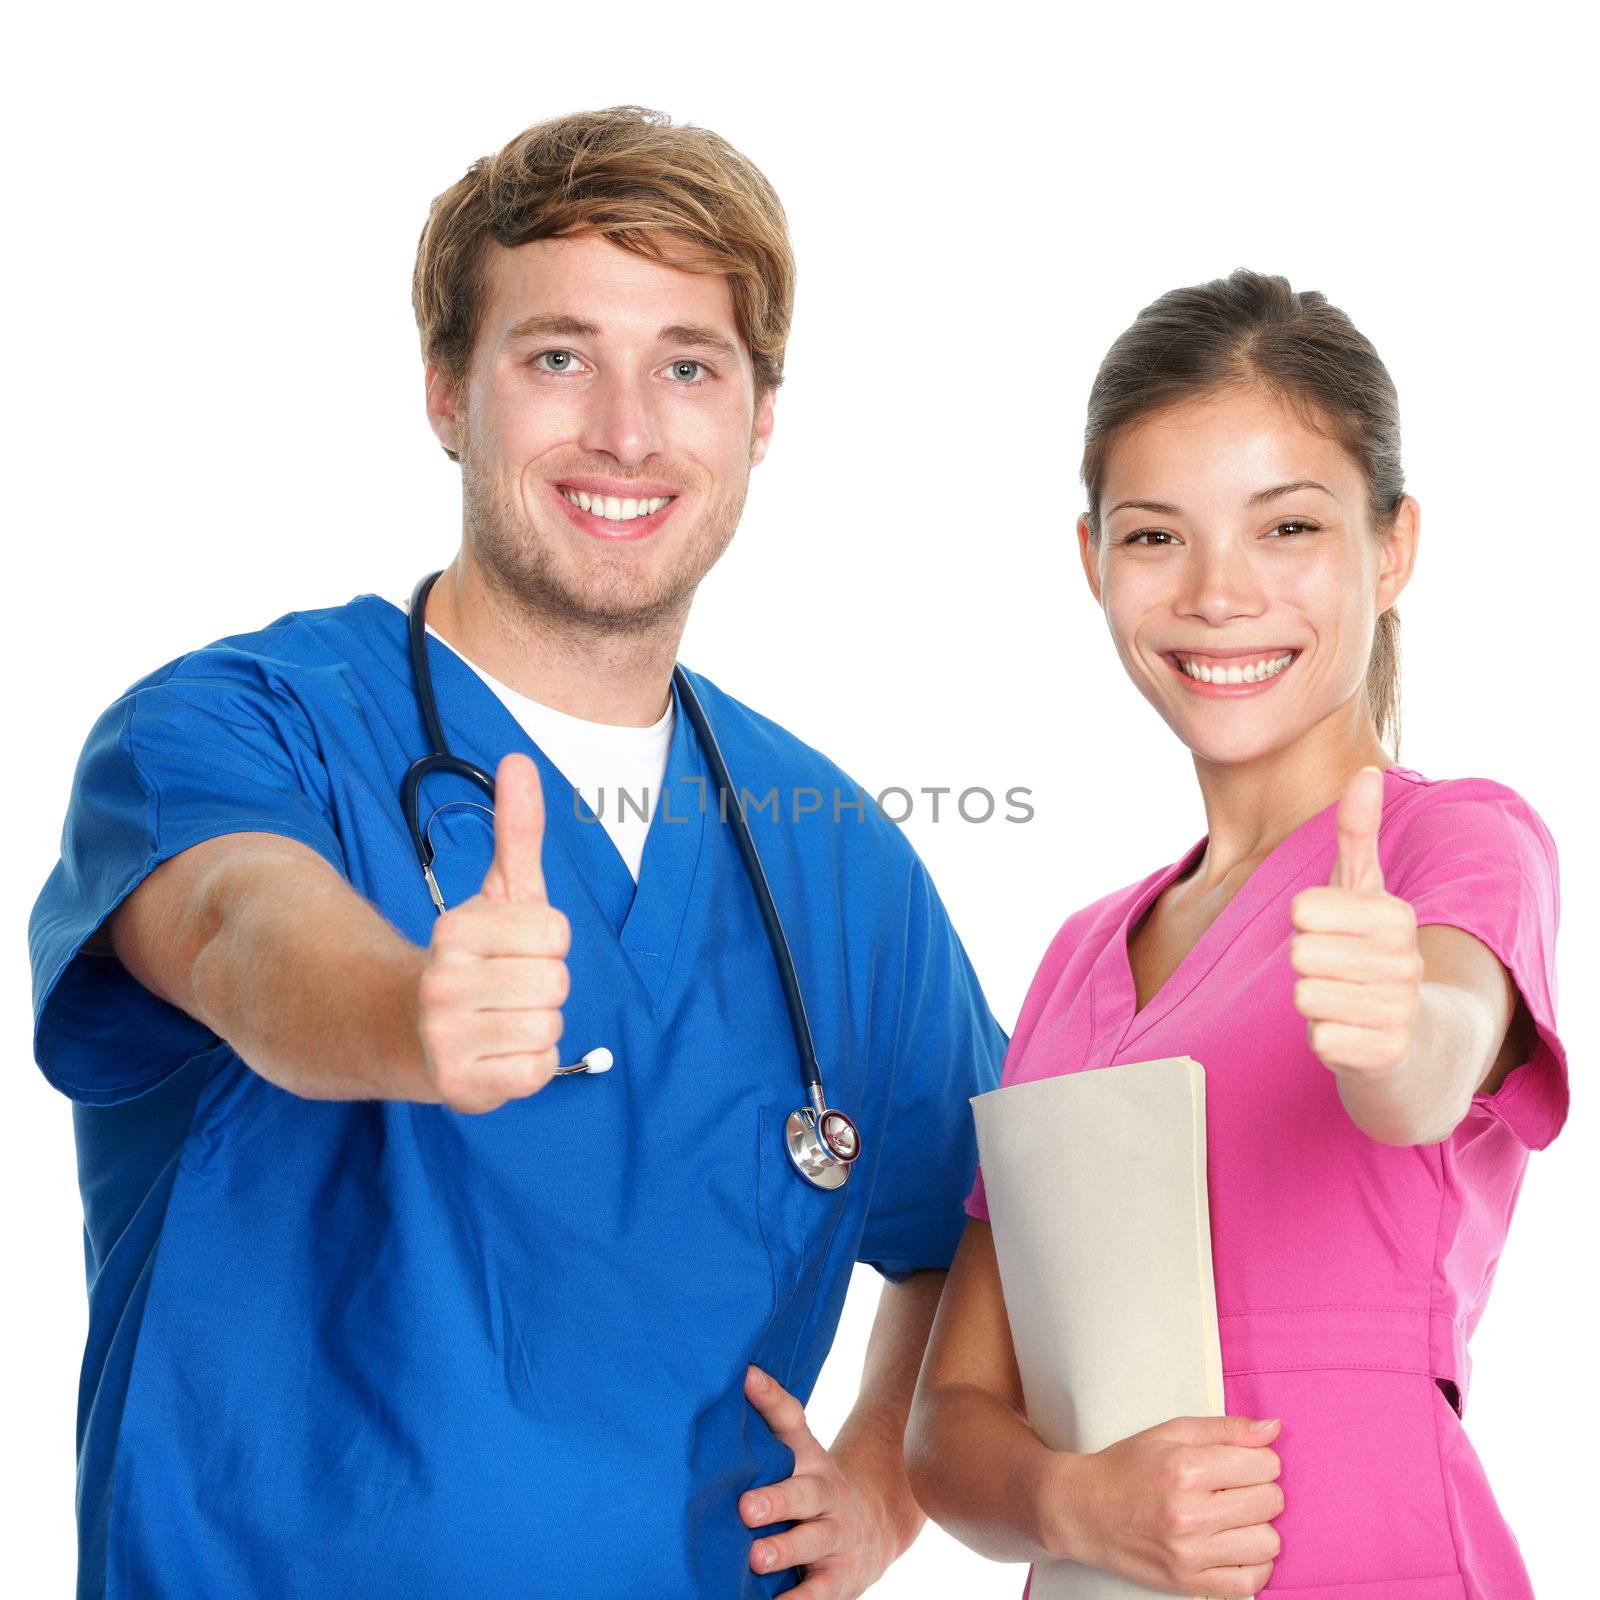 Nurse and doctor team giving happy thumbs up smiling joyful at camera. Young medical professionals isolated on white background. Asian woman and Caucasian man in their 20s.